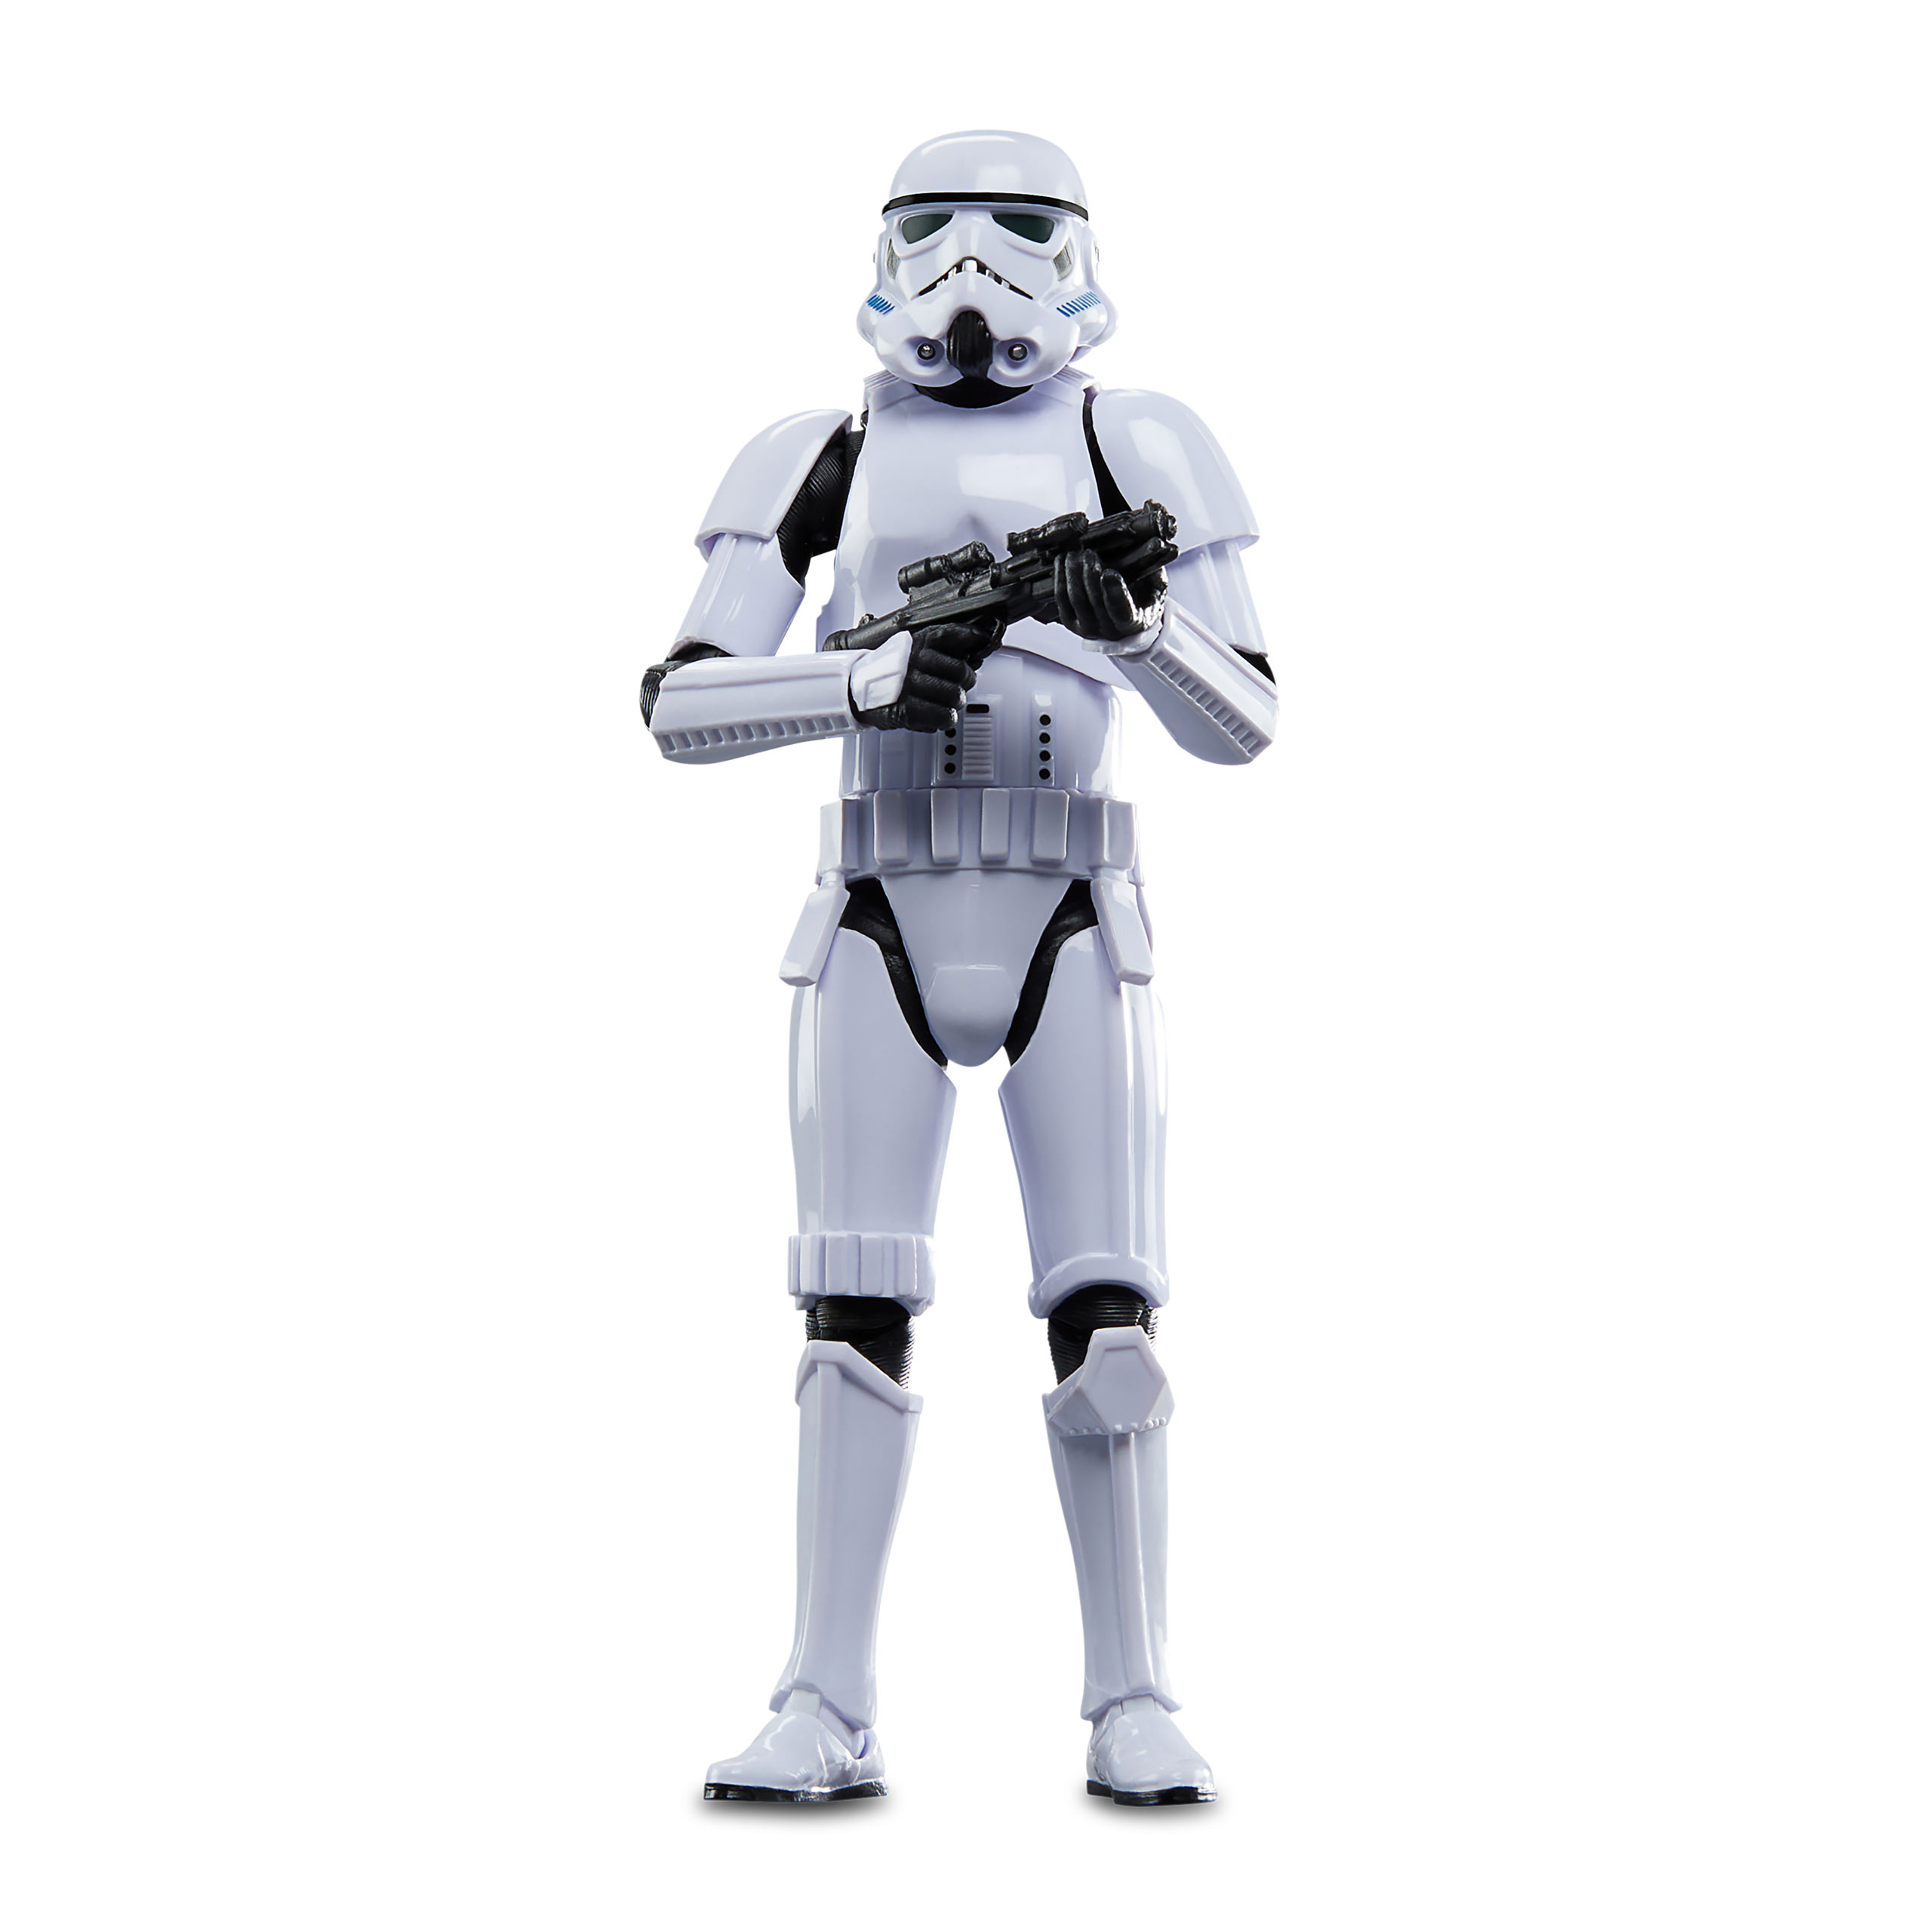 Star Wars - Imperial Stormtrooper with Blaster Black Series Action Figure